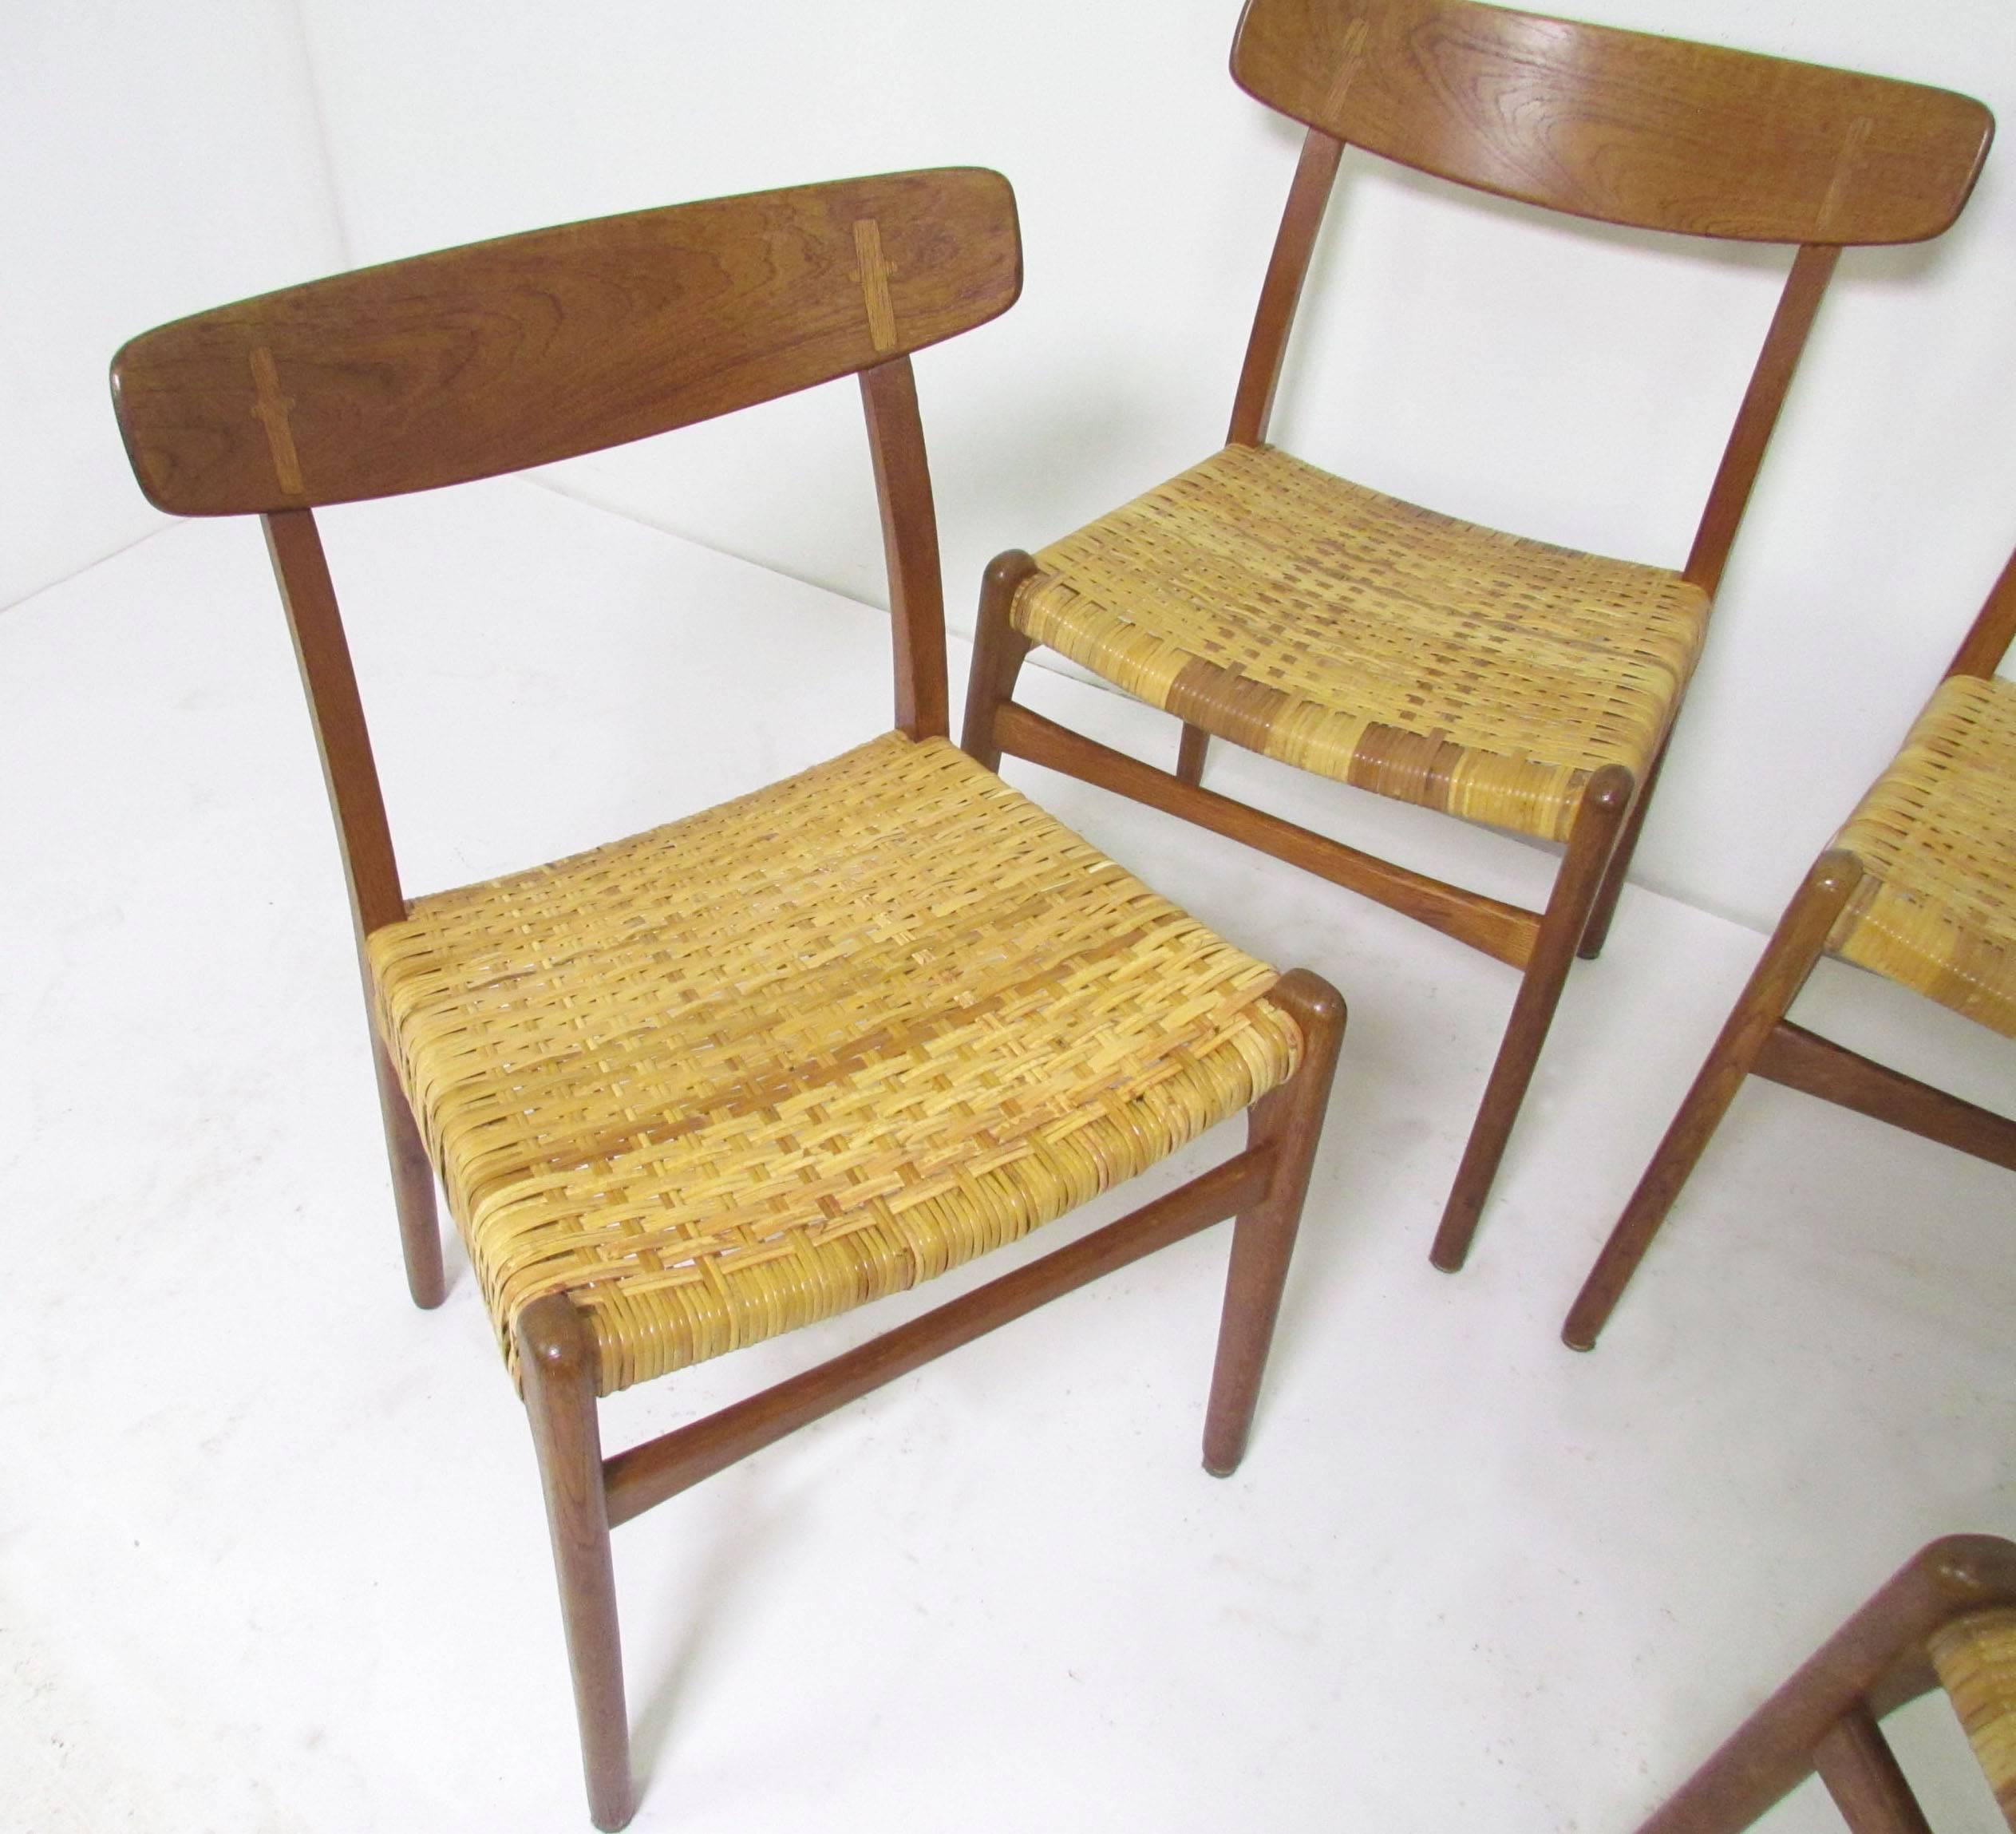 Set of four Hans Wegner CH-23 dining chairs in teak and oak with woven cane seats, circa 1950s.